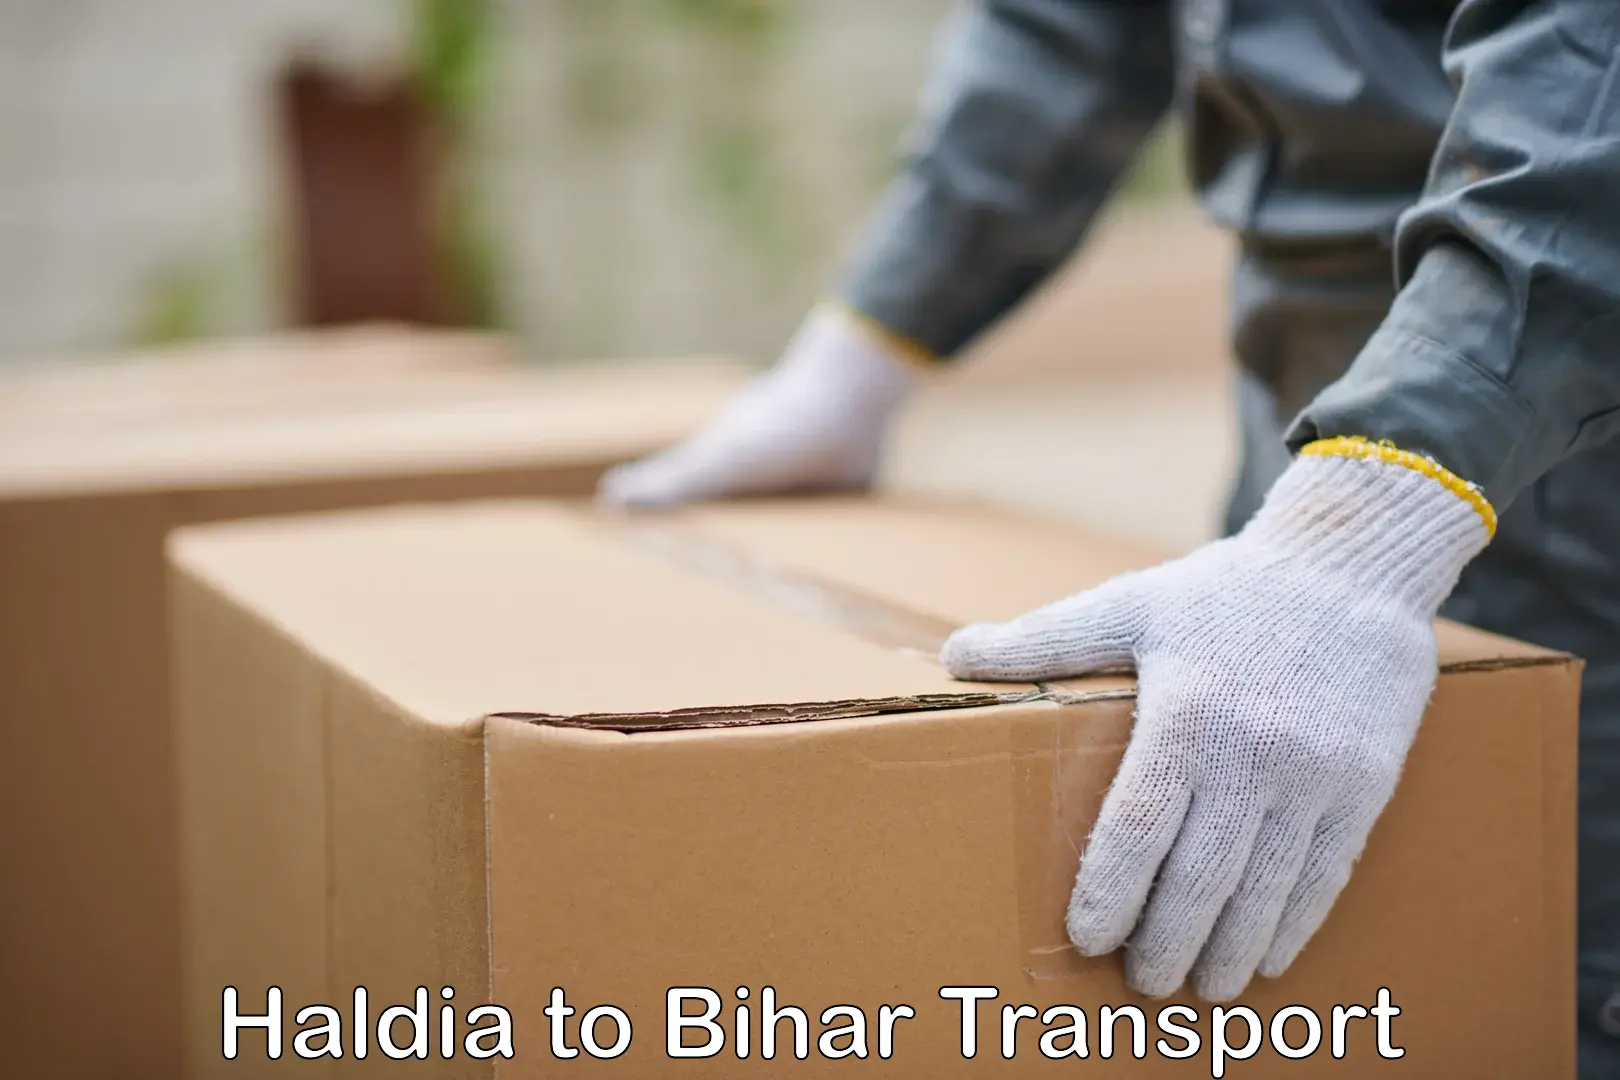 Transport bike from one state to another Haldia to Bihar